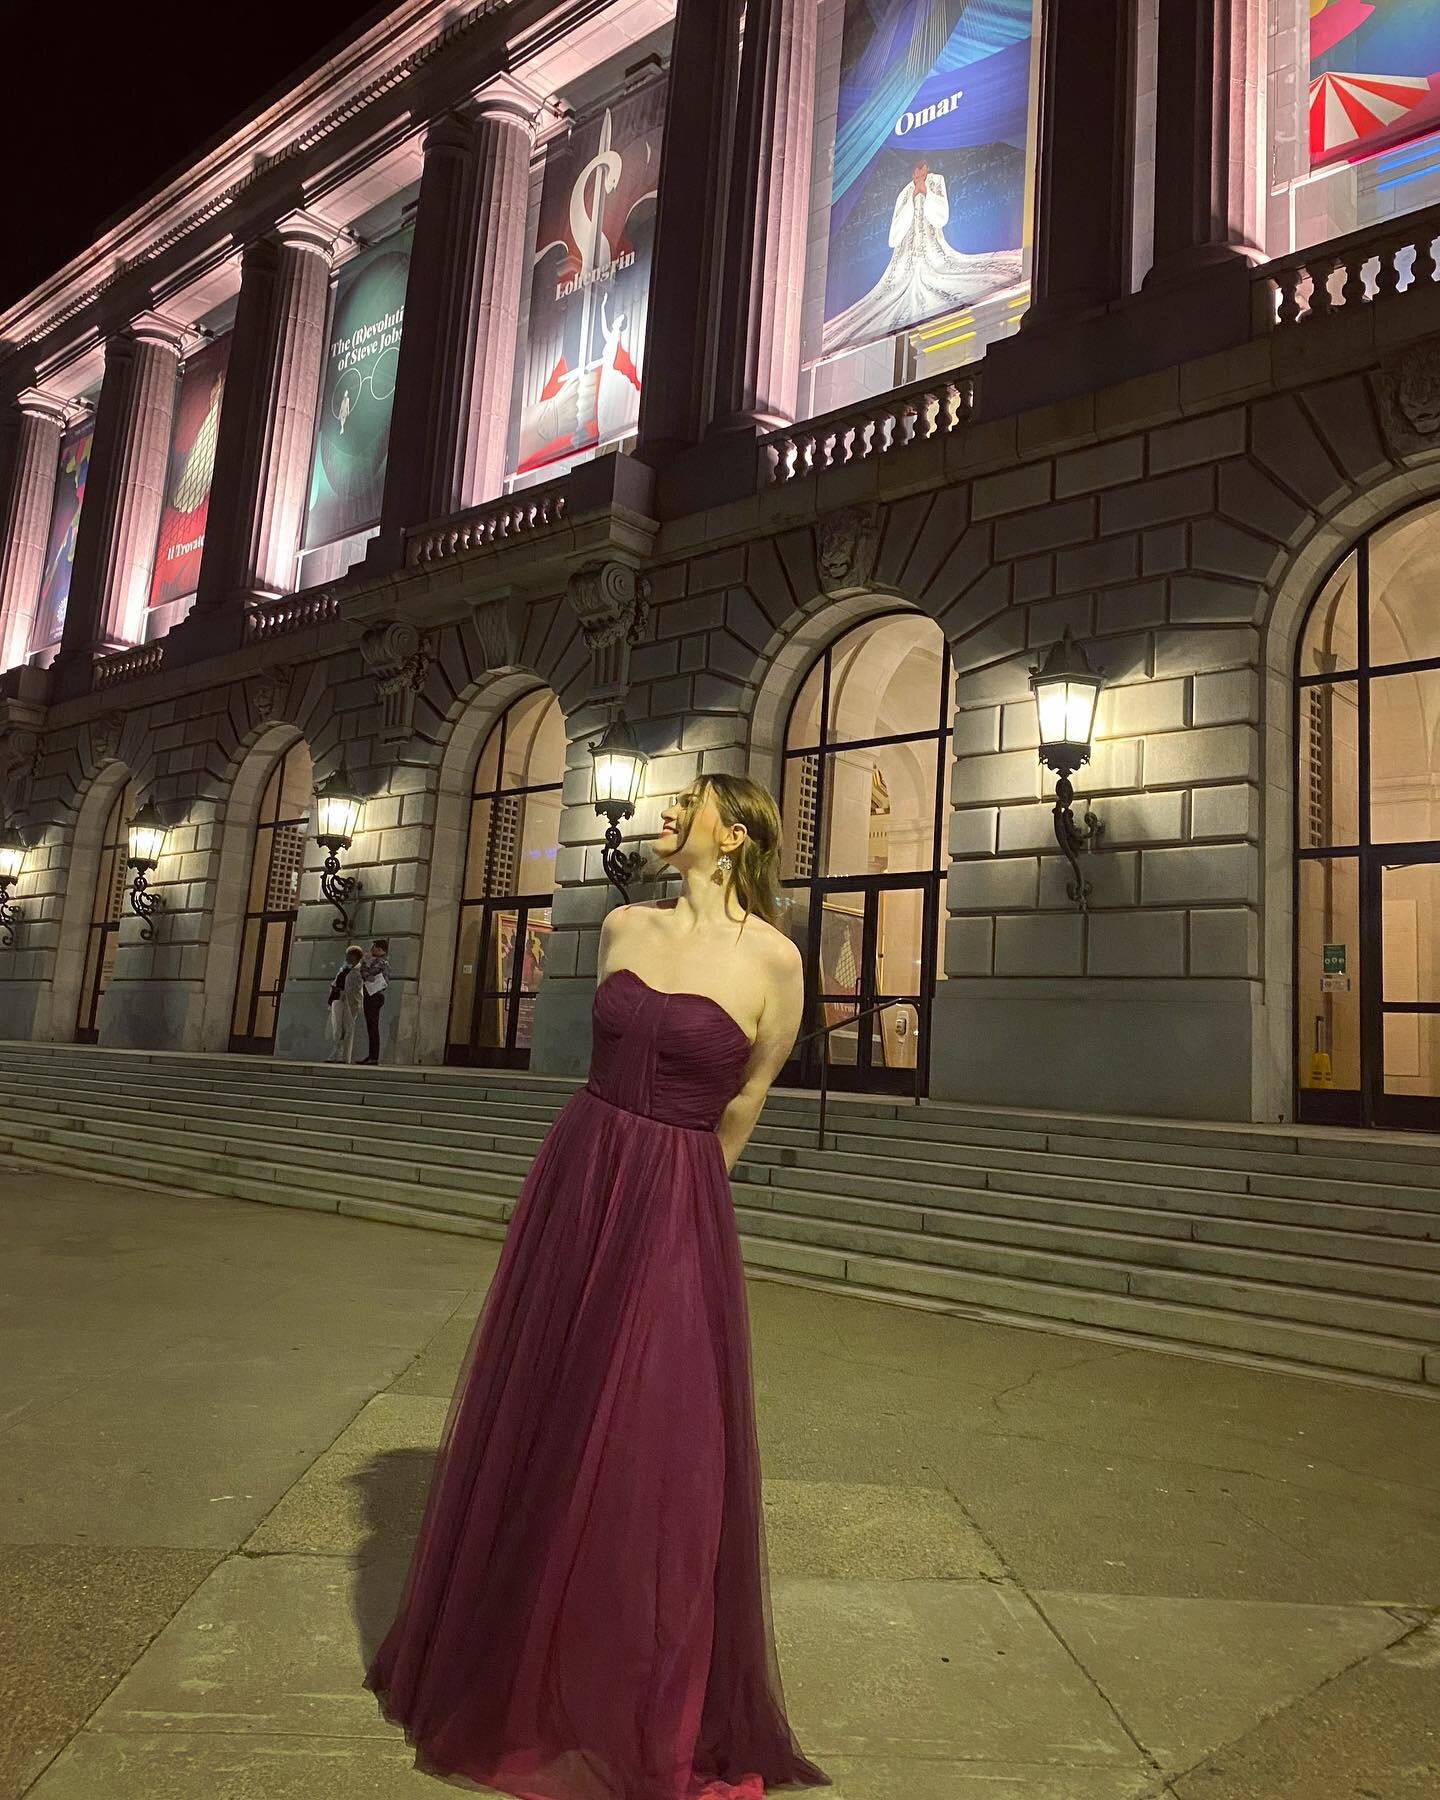 La Merolina 🖤⁣ feeling pretty GRAND after last night&rsquo;s Merola Grand Finale Concert!
⁣
My time in San Francisco is coming to a close, and I can&rsquo;t help but think about how these past 11 weeks have inspired, challenged, and guided me toward